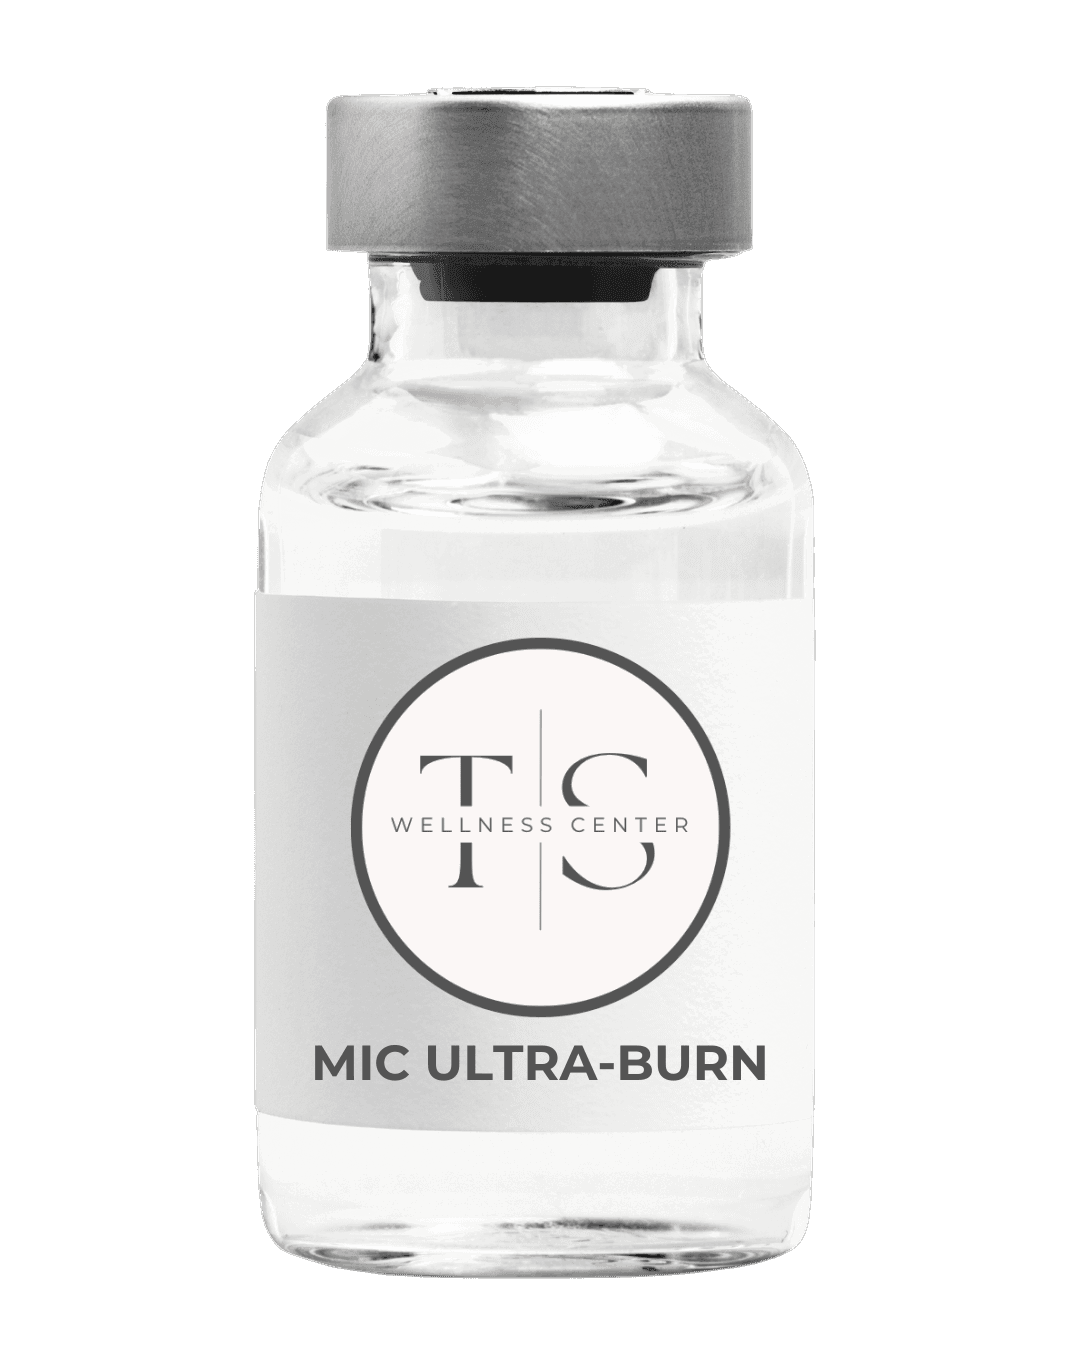 MIC Ultra-Burn IV Injection Therapy Tarpon Springs Wellness Center